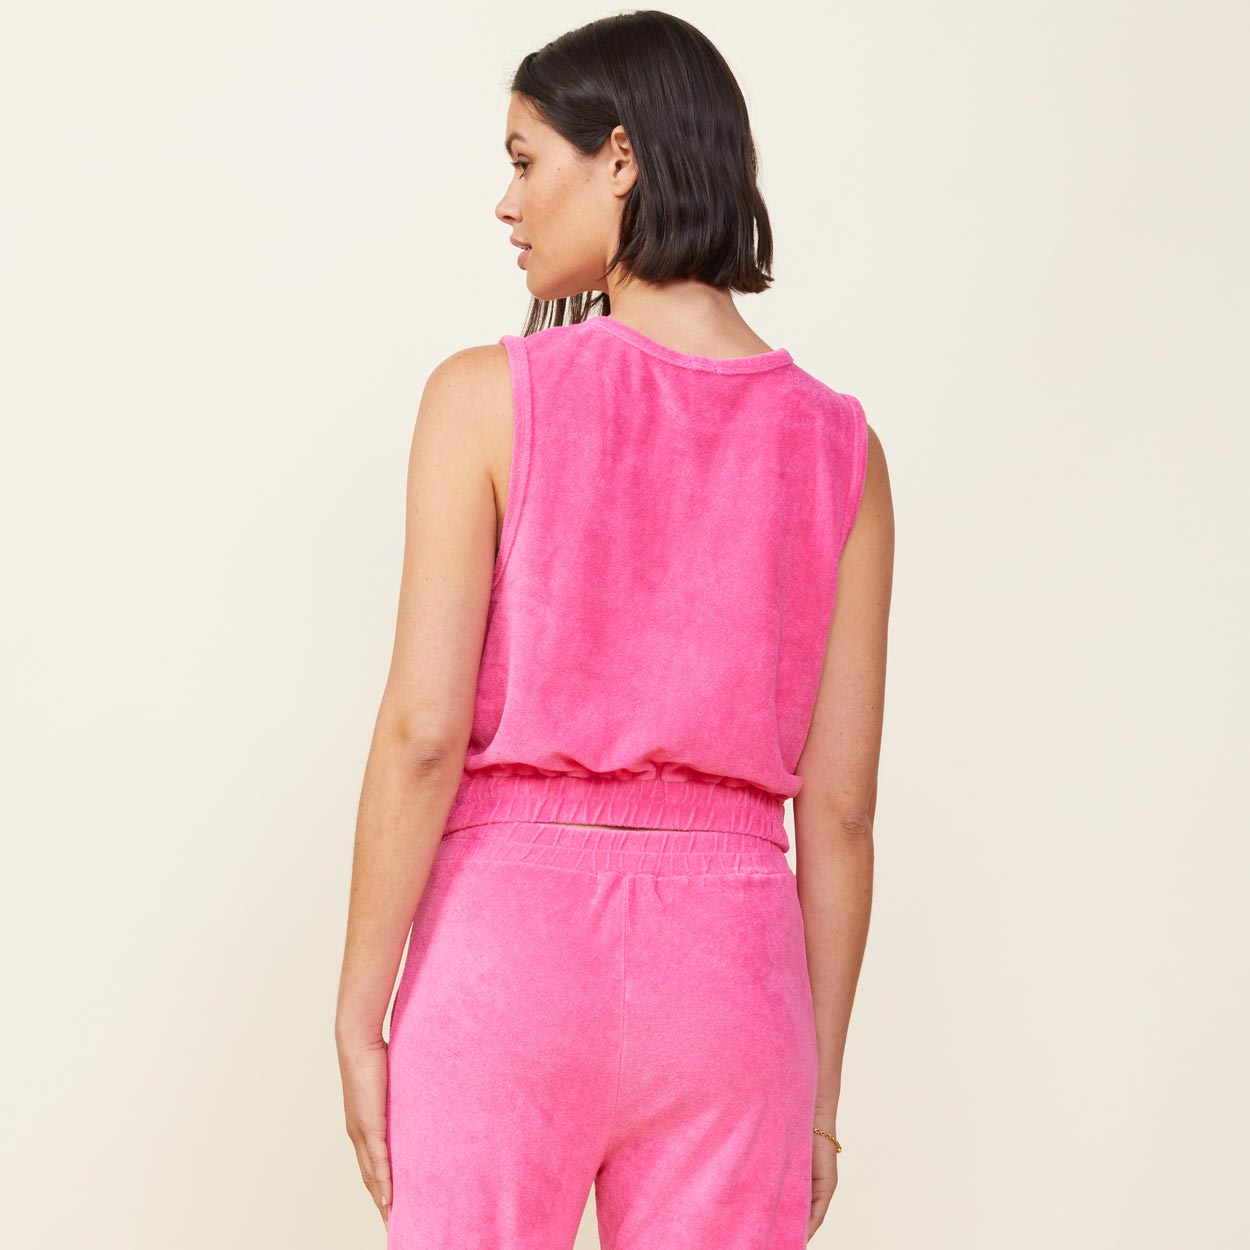 Back view of model wearing the terry cloth tank in rose bud.